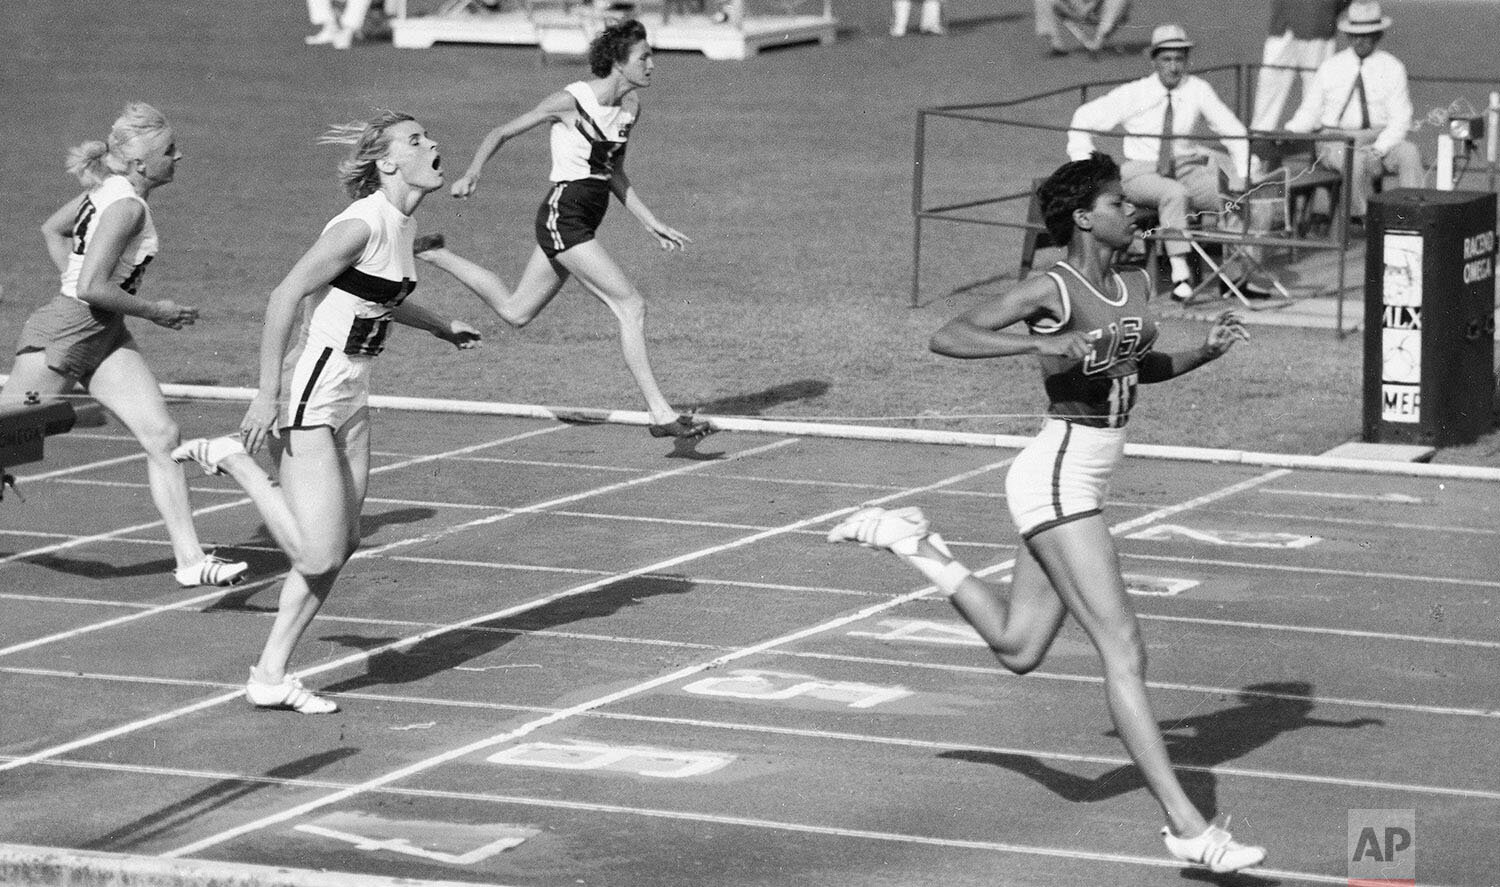  Wilma Rudolph of the United States, right, romps home to win her semi-final of the women's 200-meter race at the Olympic Games in Rome, Sept. 5, 1960. She is followed by Jutta Heine of Germany (black stripe on white shirt) who was second and Poland'